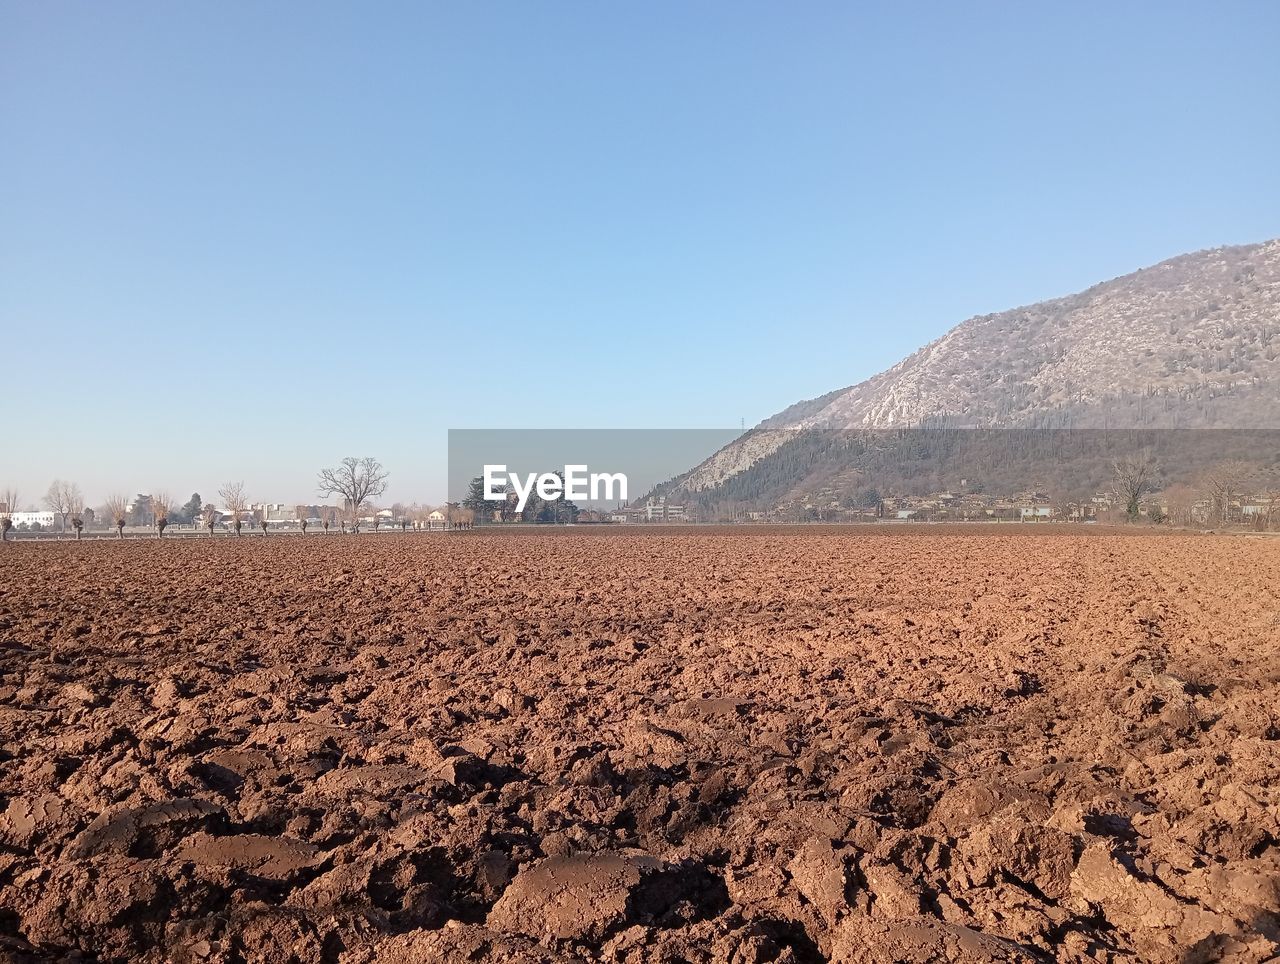 soil, landscape, natural environment, environment, sky, land, nature, scenics - nature, field, horizon, clear sky, plain, no people, desert, mountain, blue, plateau, beauty in nature, copy space, day, sunny, climate, plant, dry, drought, agriculture, rural scene, non-urban scene, arid climate, outdoors, tranquility, valley, sunlight, brown, geology, tranquil scene, dirt